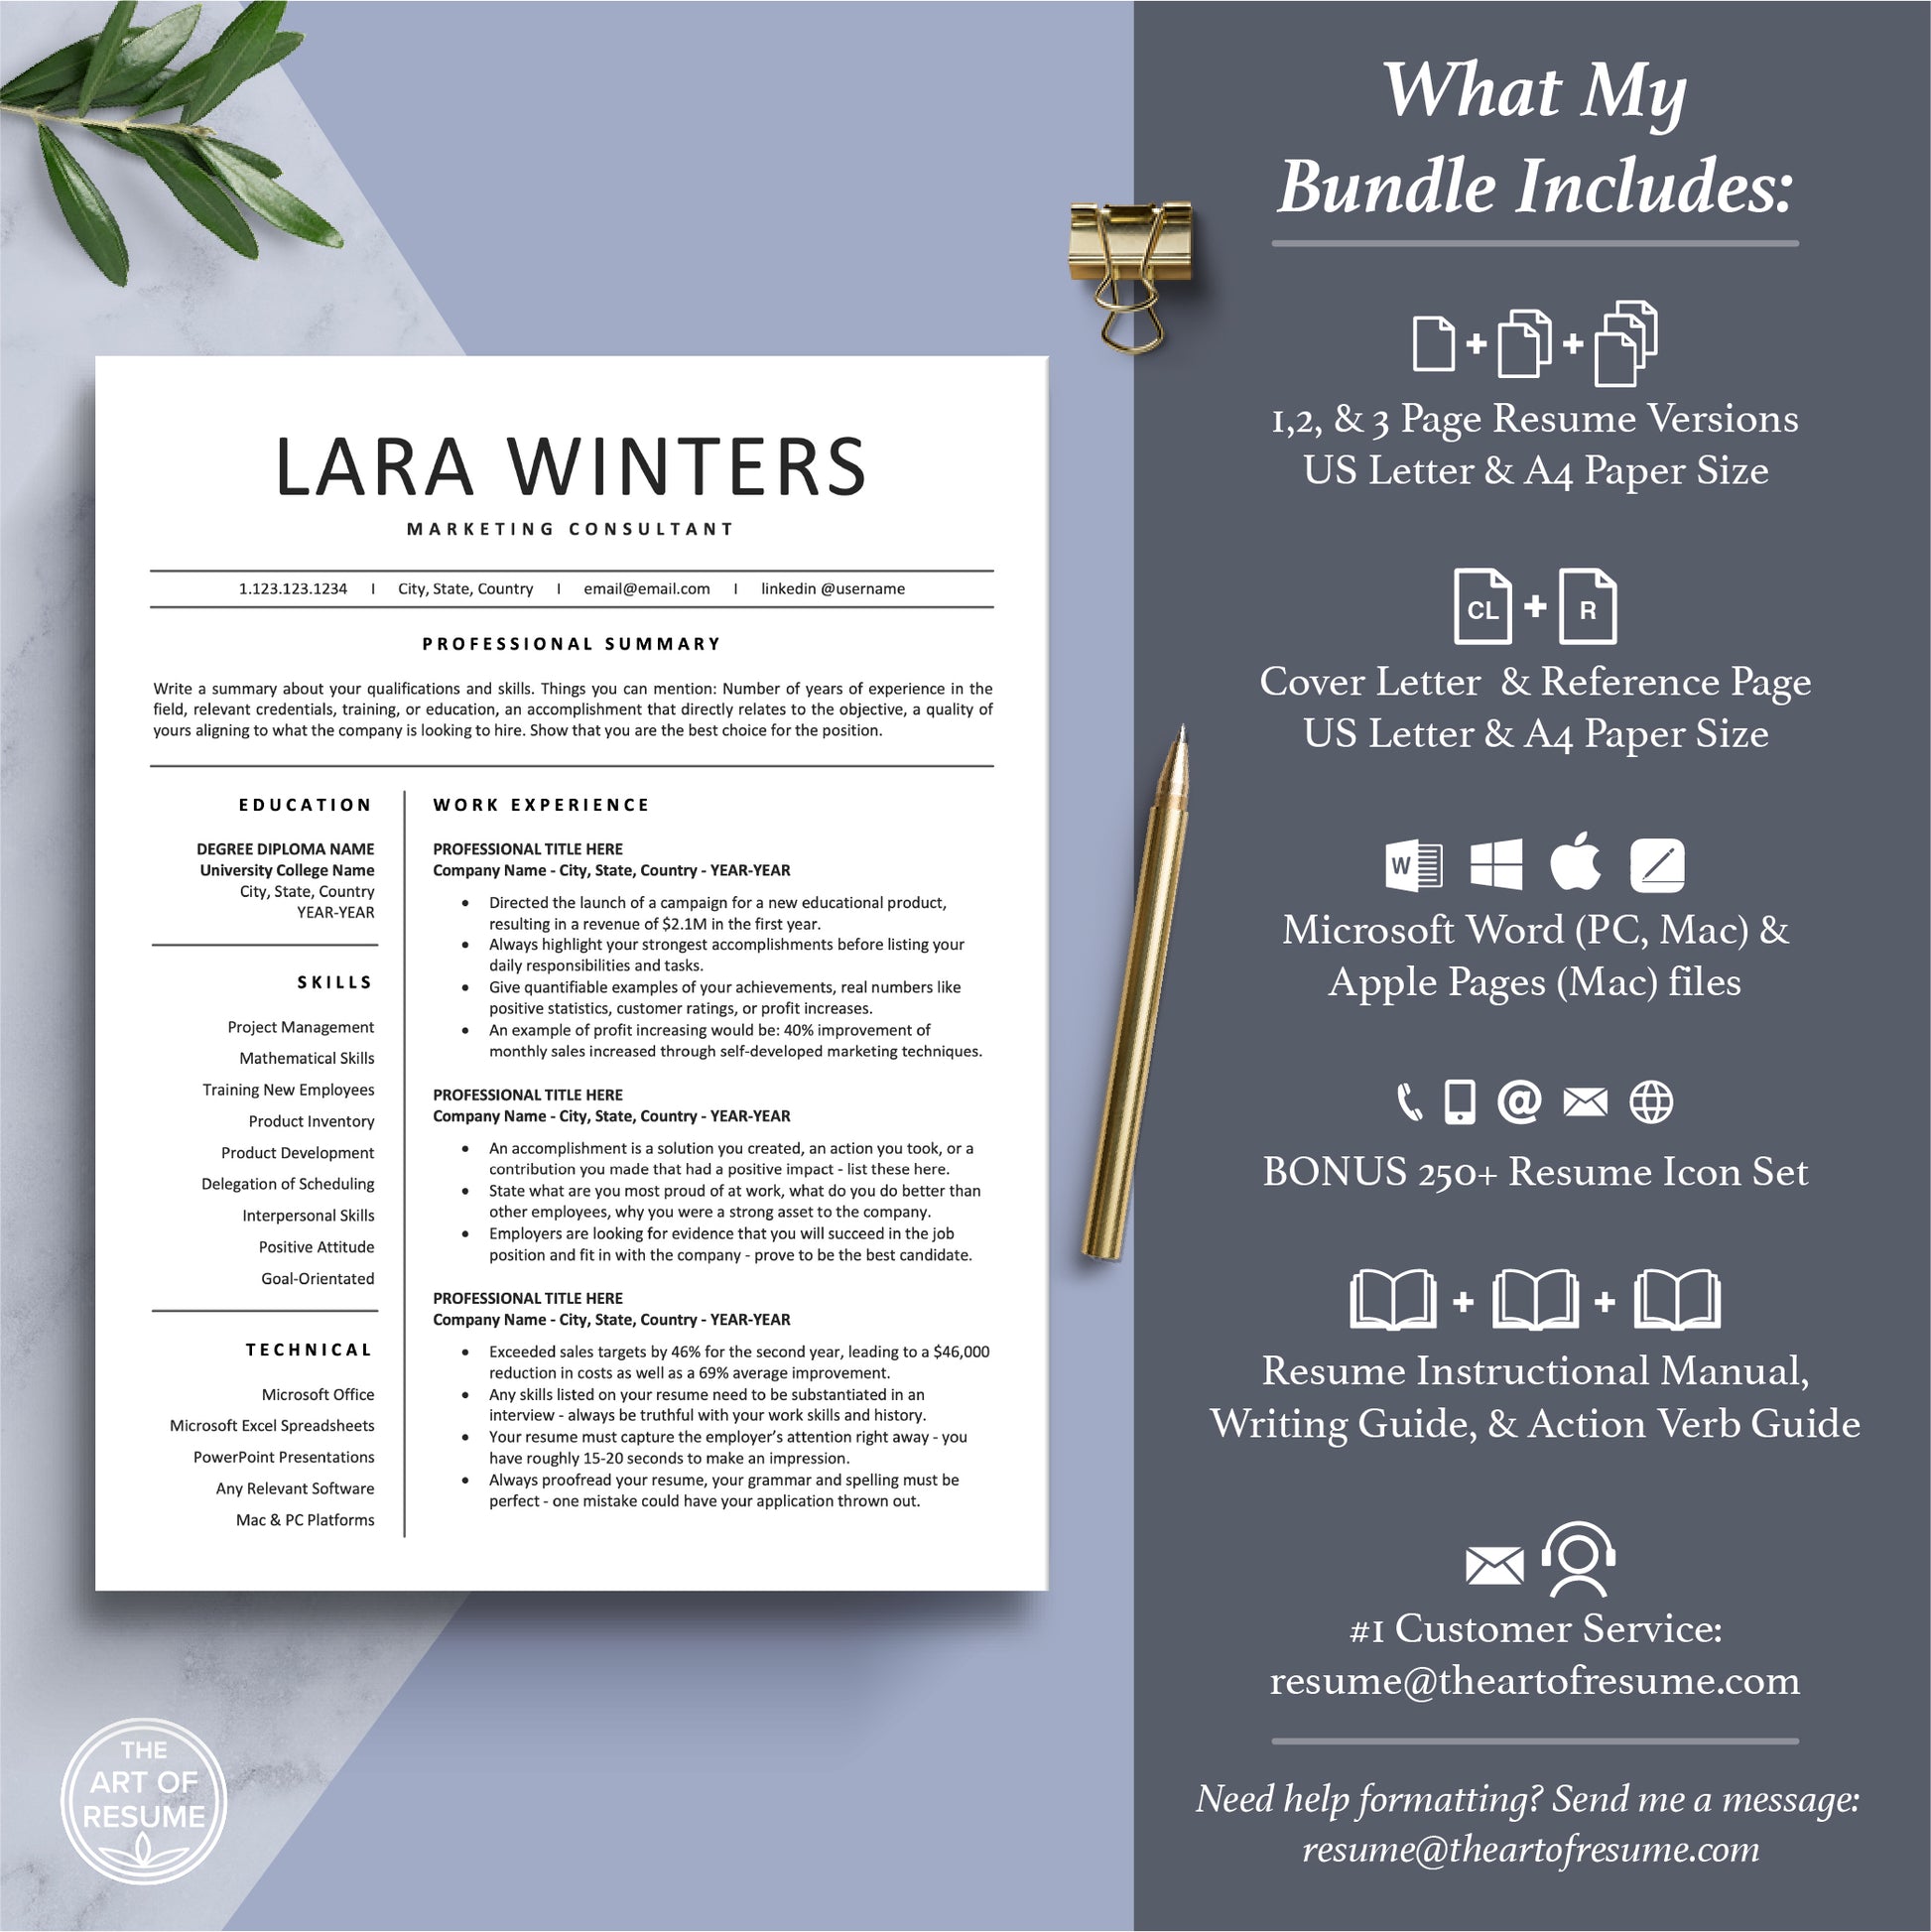 The Art of Resume Templates |  Professional Simple CV Template Includes 3 Editable Resume Templates, Cover Letter, Reference Page, Mac, PC, A4 Paper, US size, Free Guide, The Art of Resume Writing, 250 Bonus Resume Icons